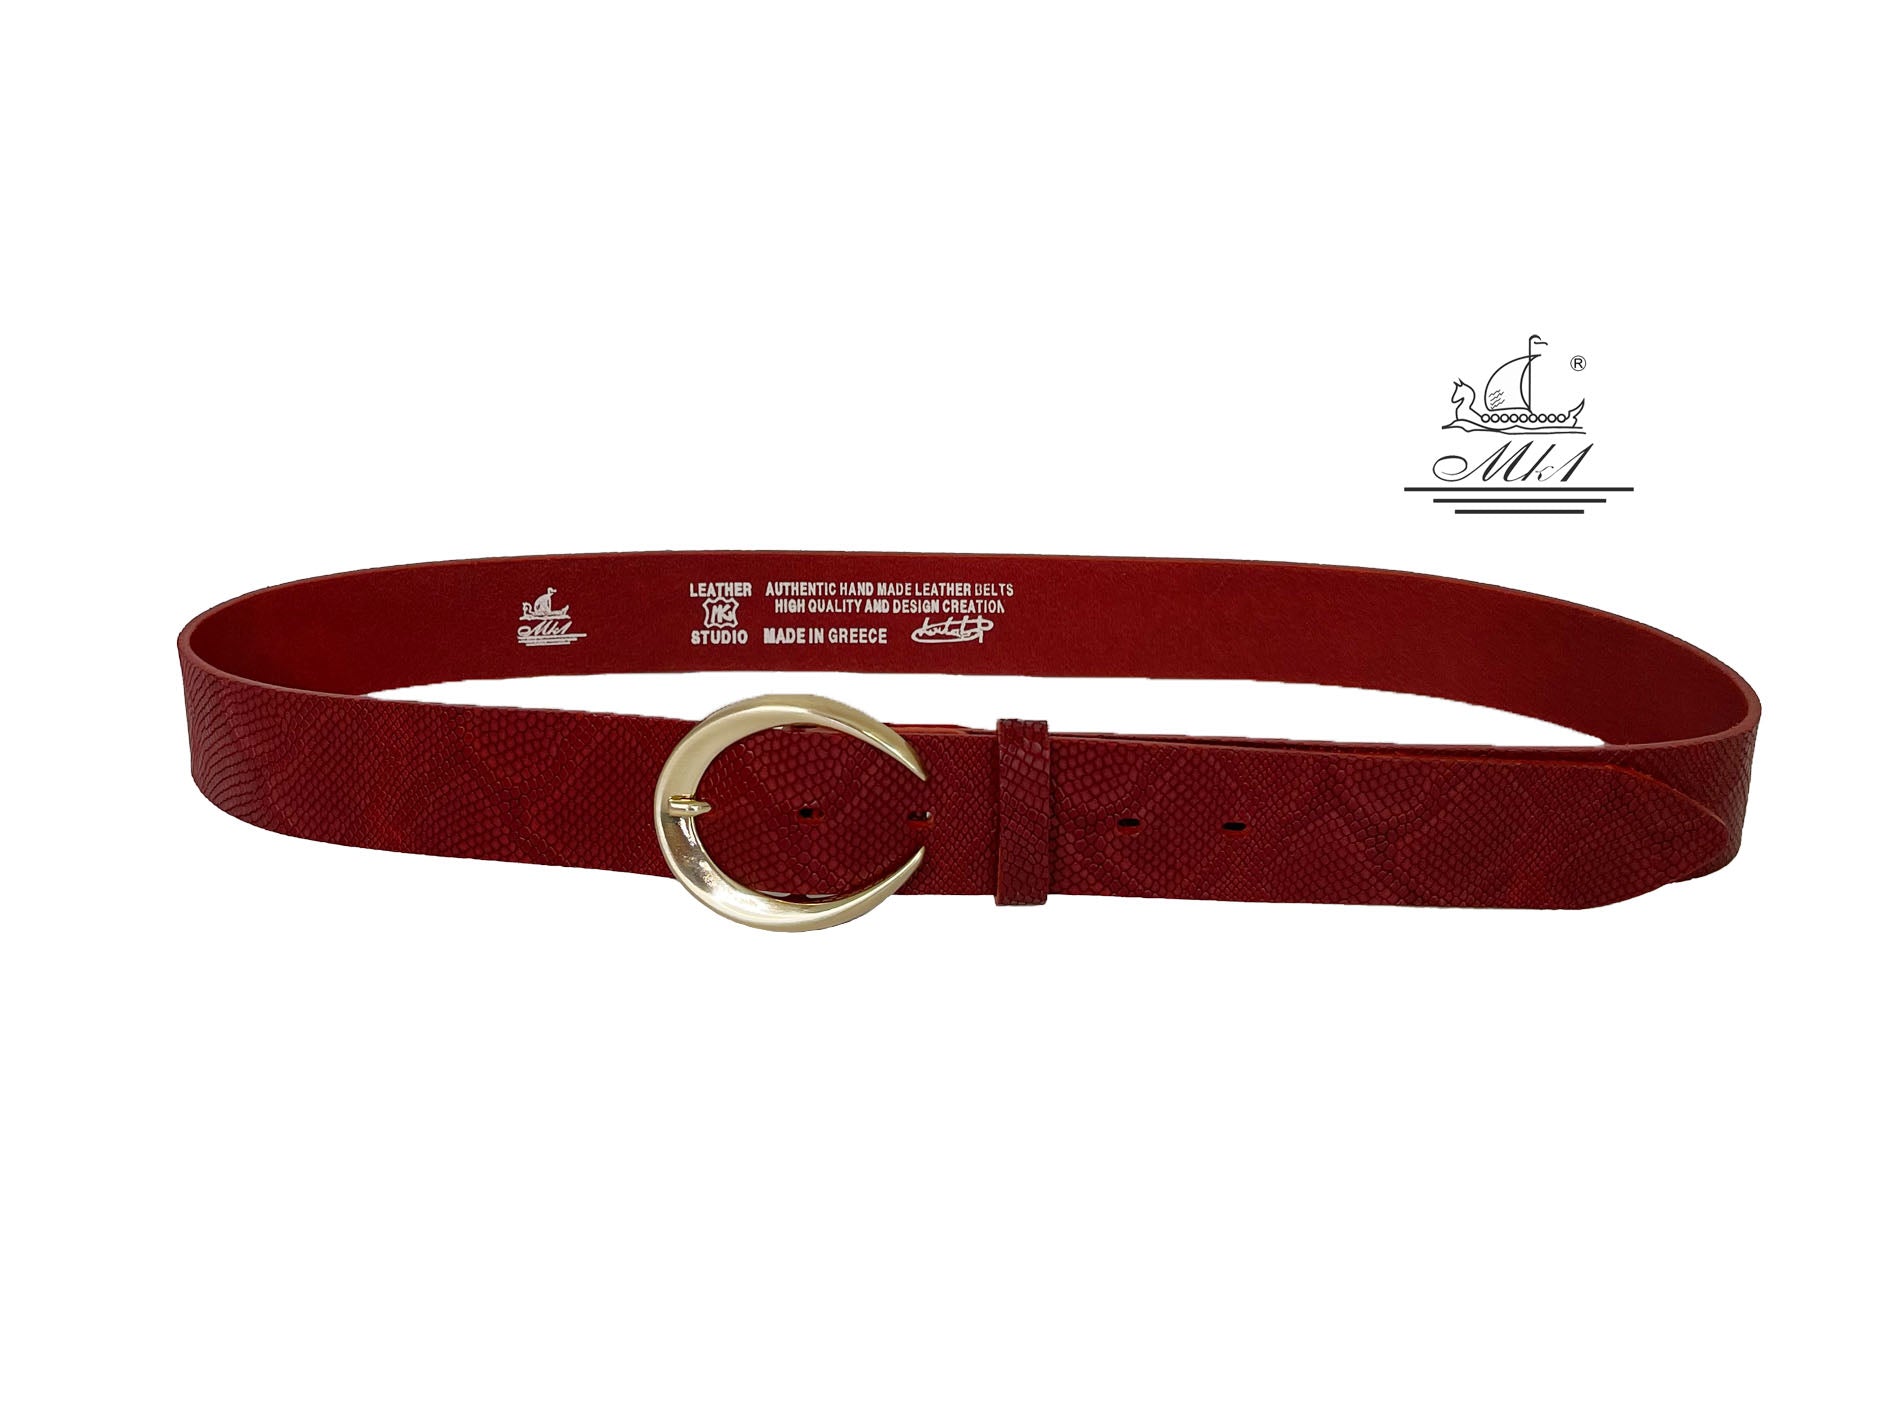 Unisex 4cm wide belt handcrafted from red leather with snake design. 101589/40RD/FD